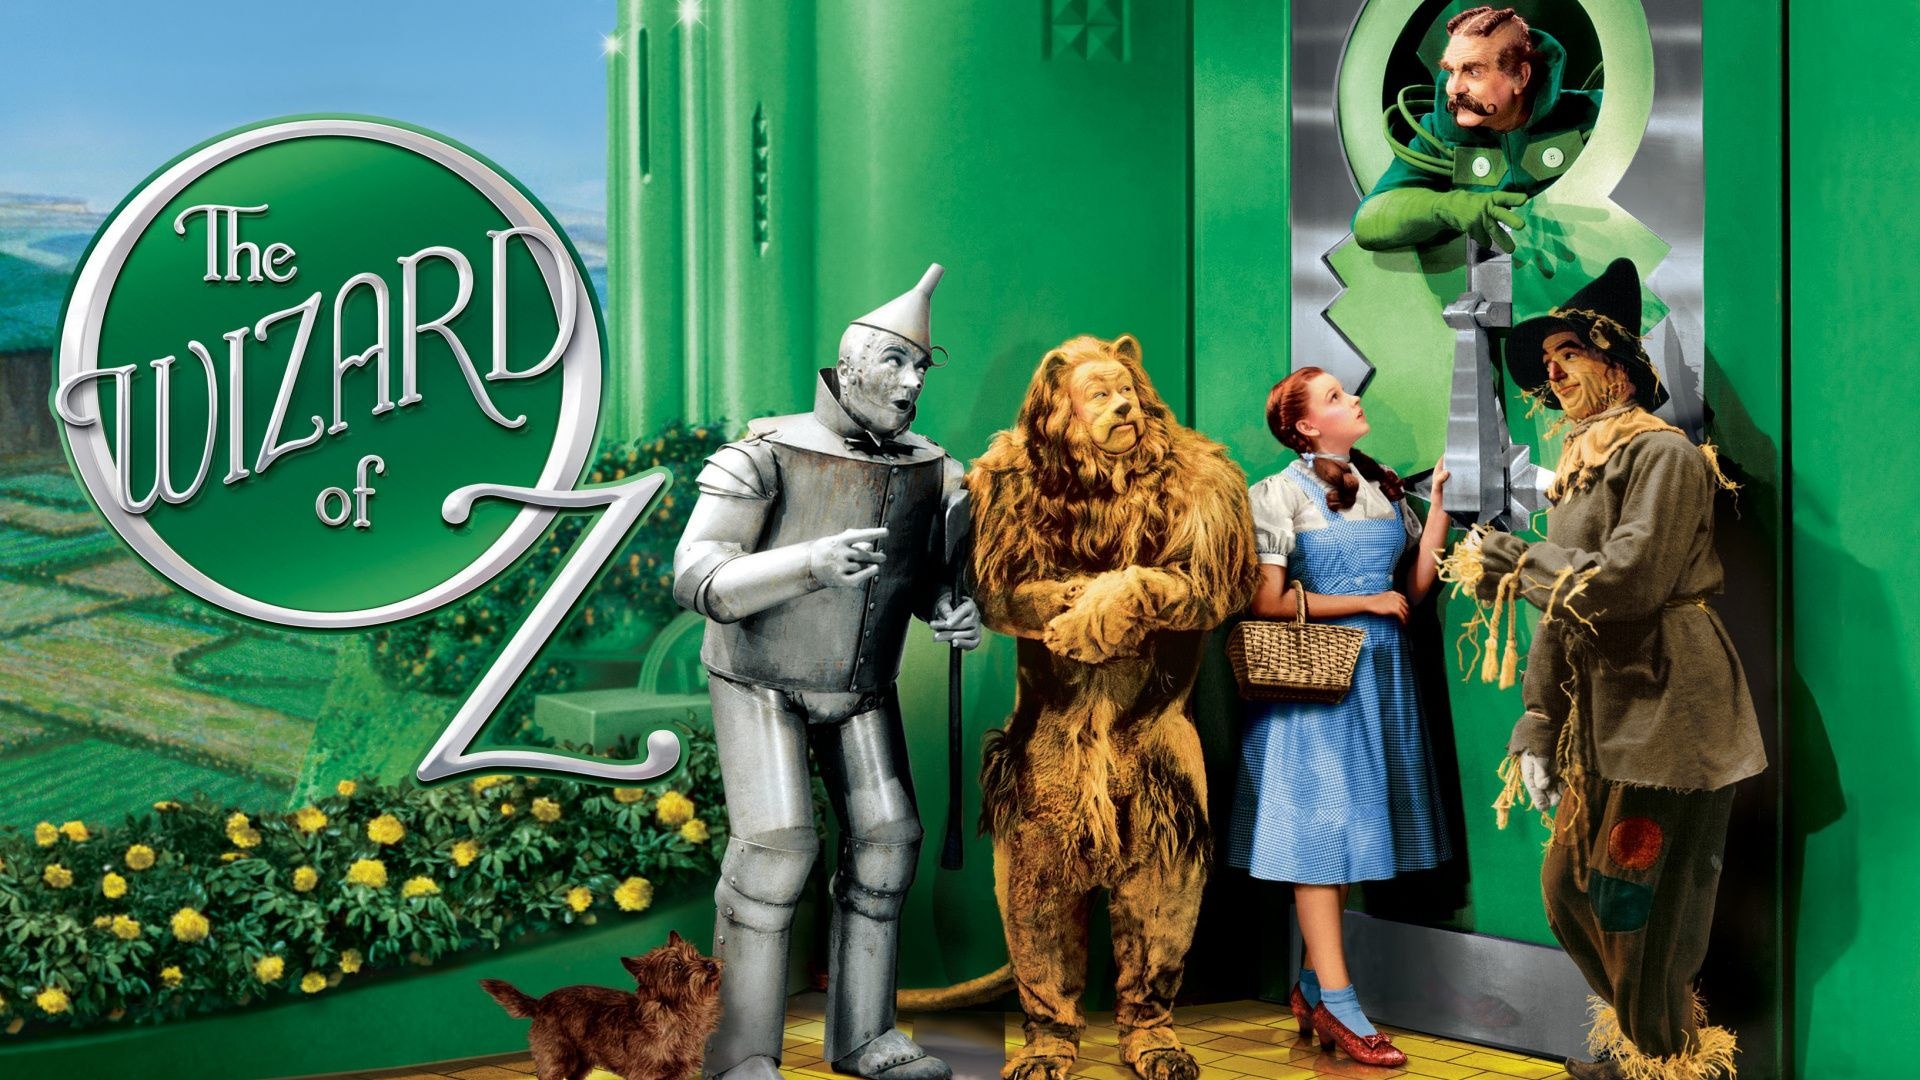 The Wizard of Oz, Fantasy film, Iconic characters, Magical journey, 1920x1080 Full HD Desktop